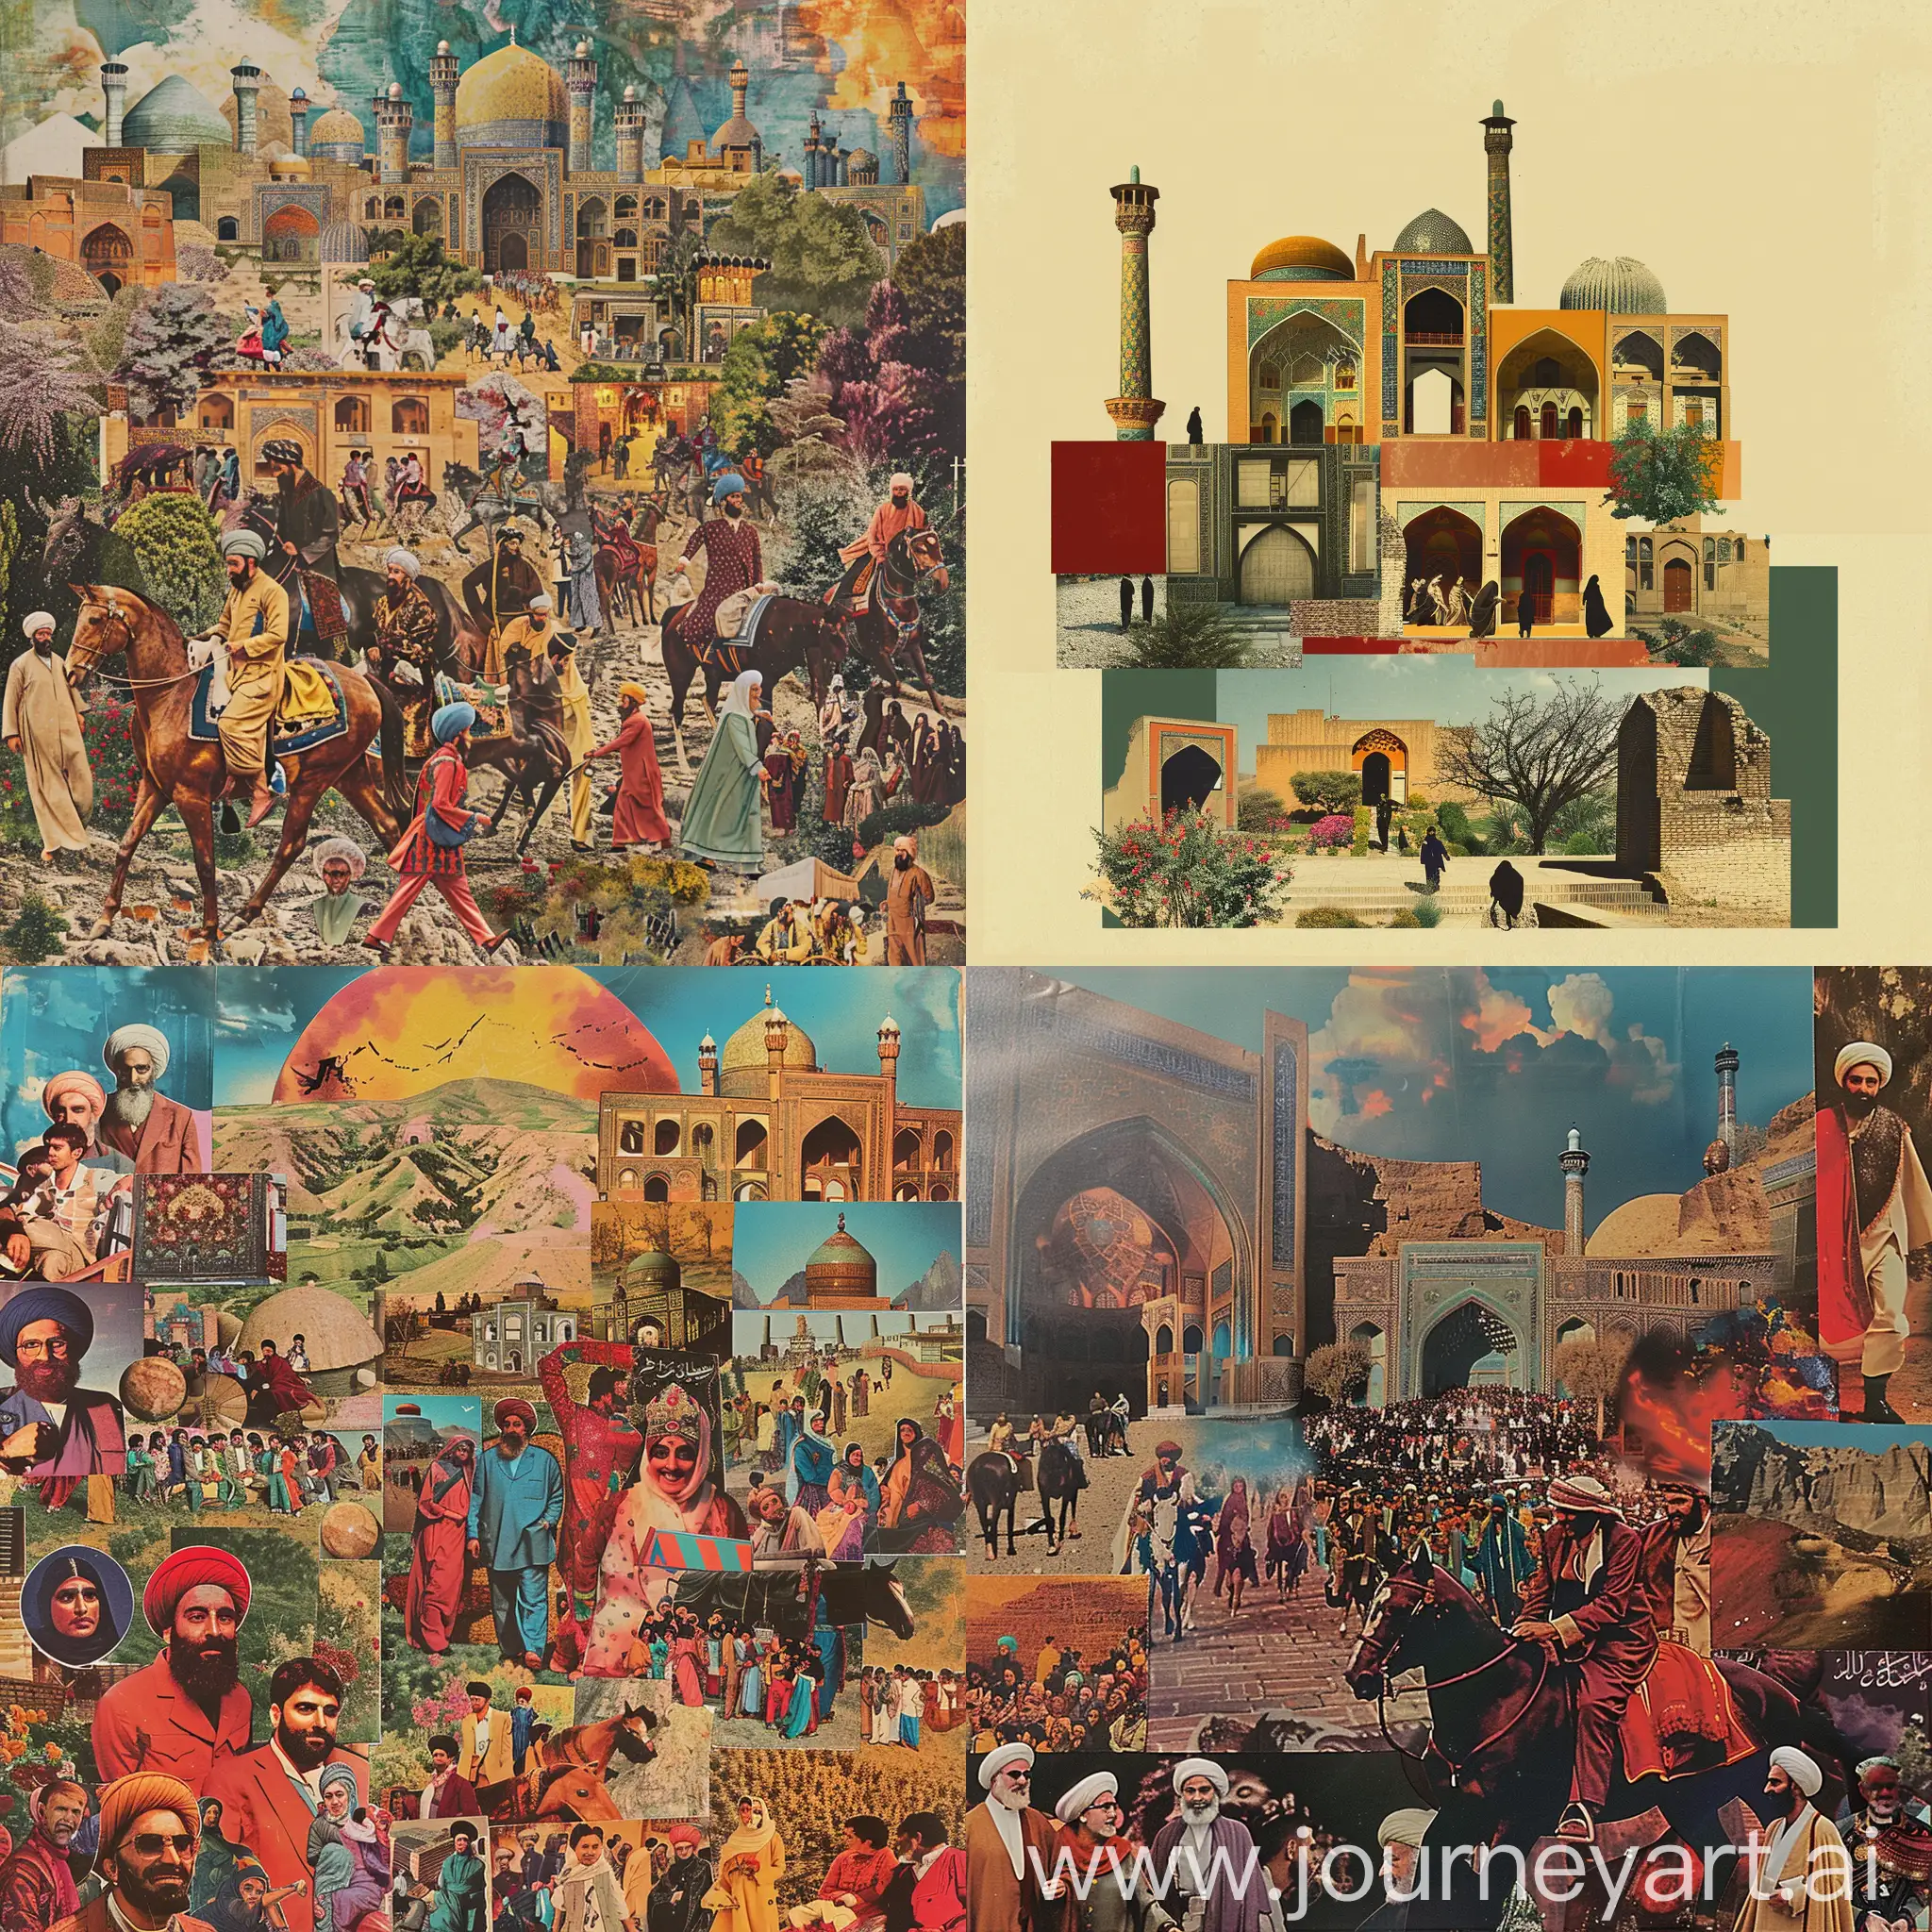 Collage about modern society, tradition, modernity, evolution of Iranian society from ancient to modern